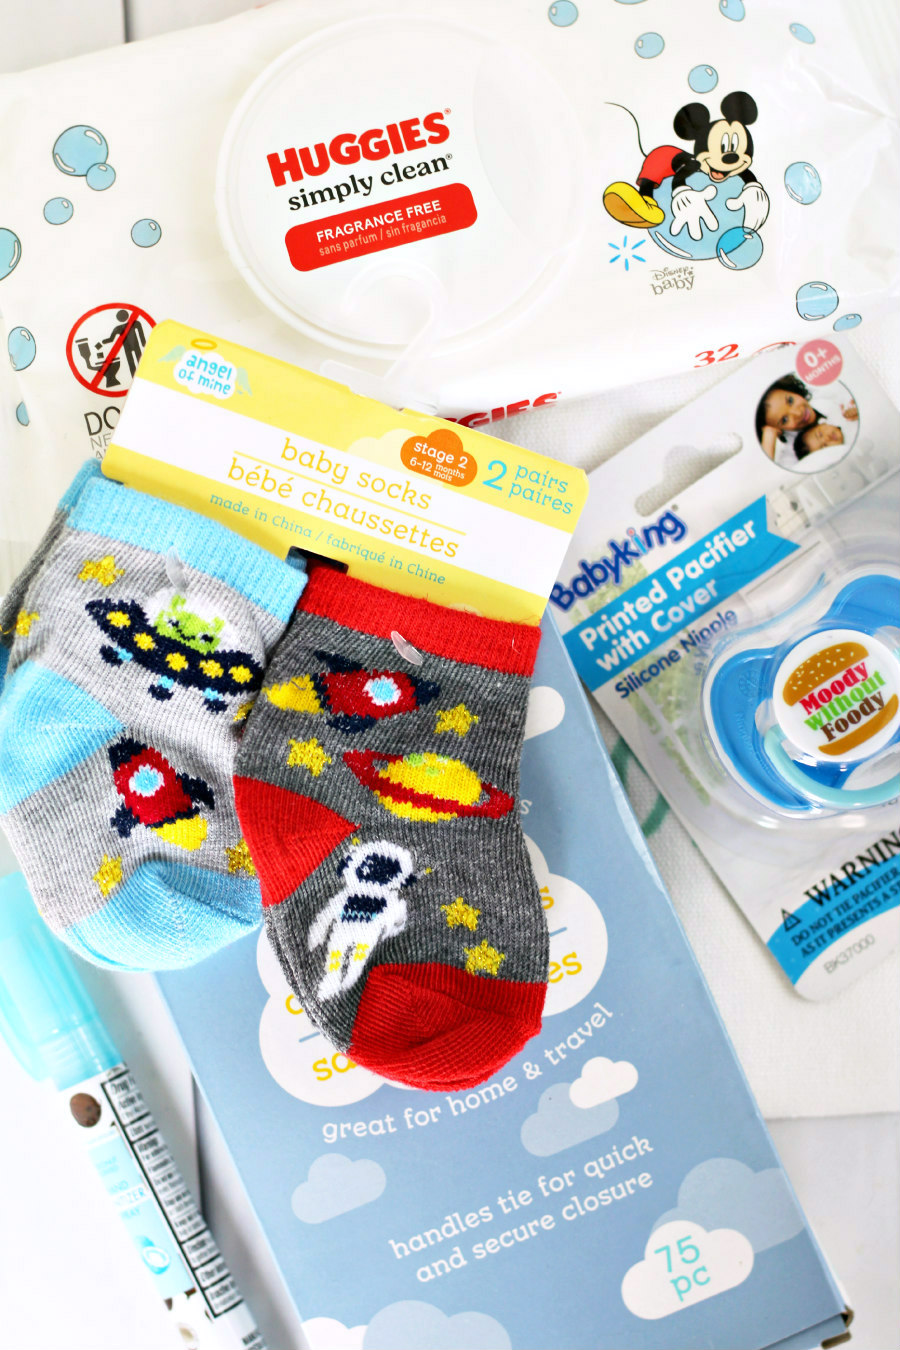 Flat lay photo of Huggies baby wipes, baby socks, hand sanitizer spray, diaper disposal bags, and a pacifier.